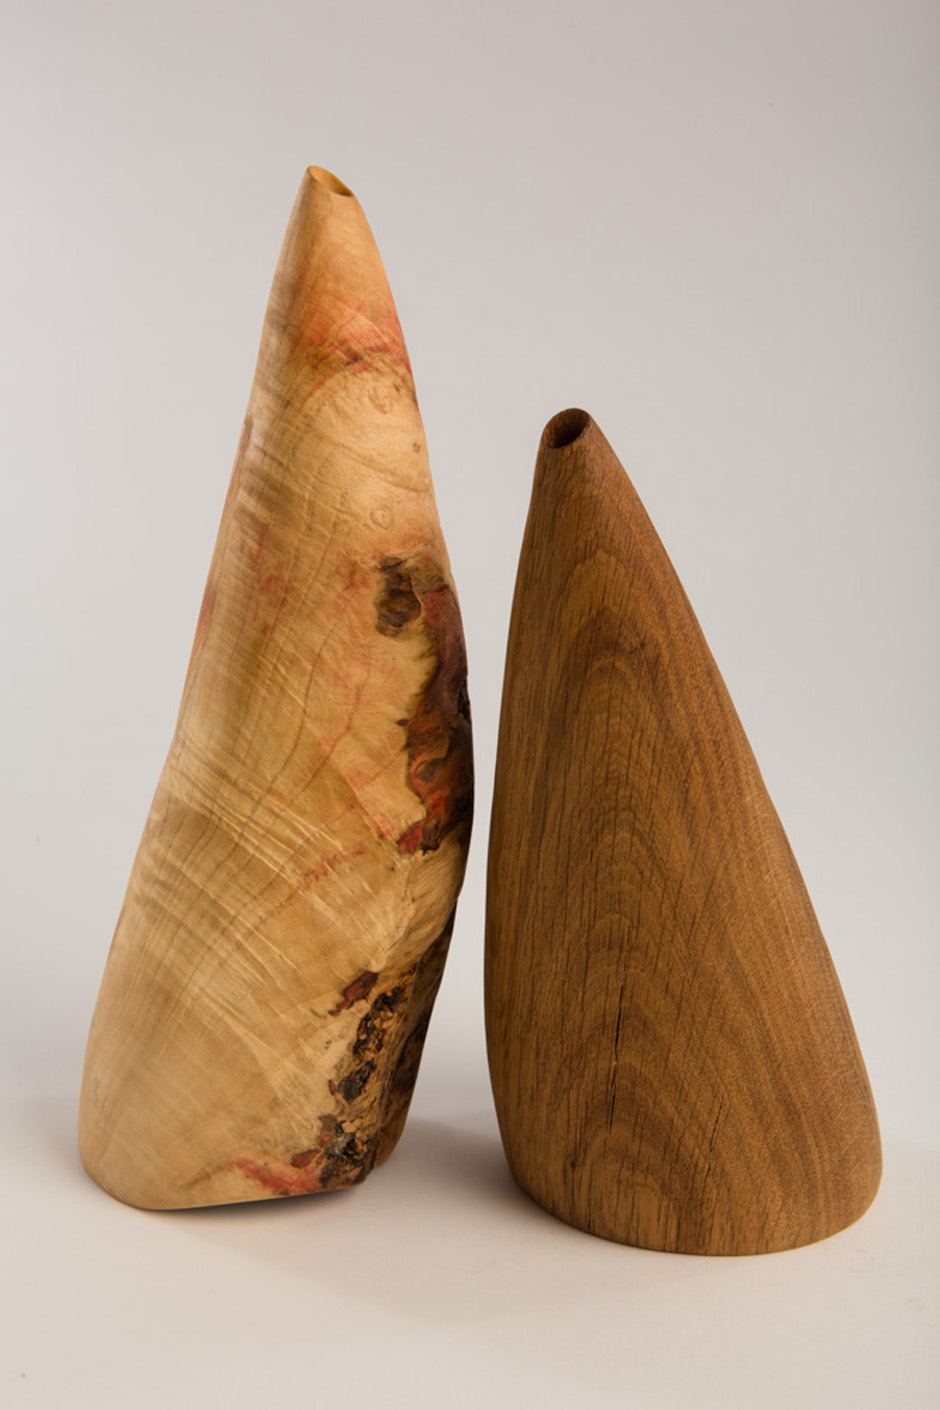  L-R Belder, Box Elder, beeswax. linseed oil, 4” diameter x 11” high and Oak, Oak, beeswax. linseed oil, 4.5” diameter x 8” high (with linen sac) Photography: Stacey Evans 